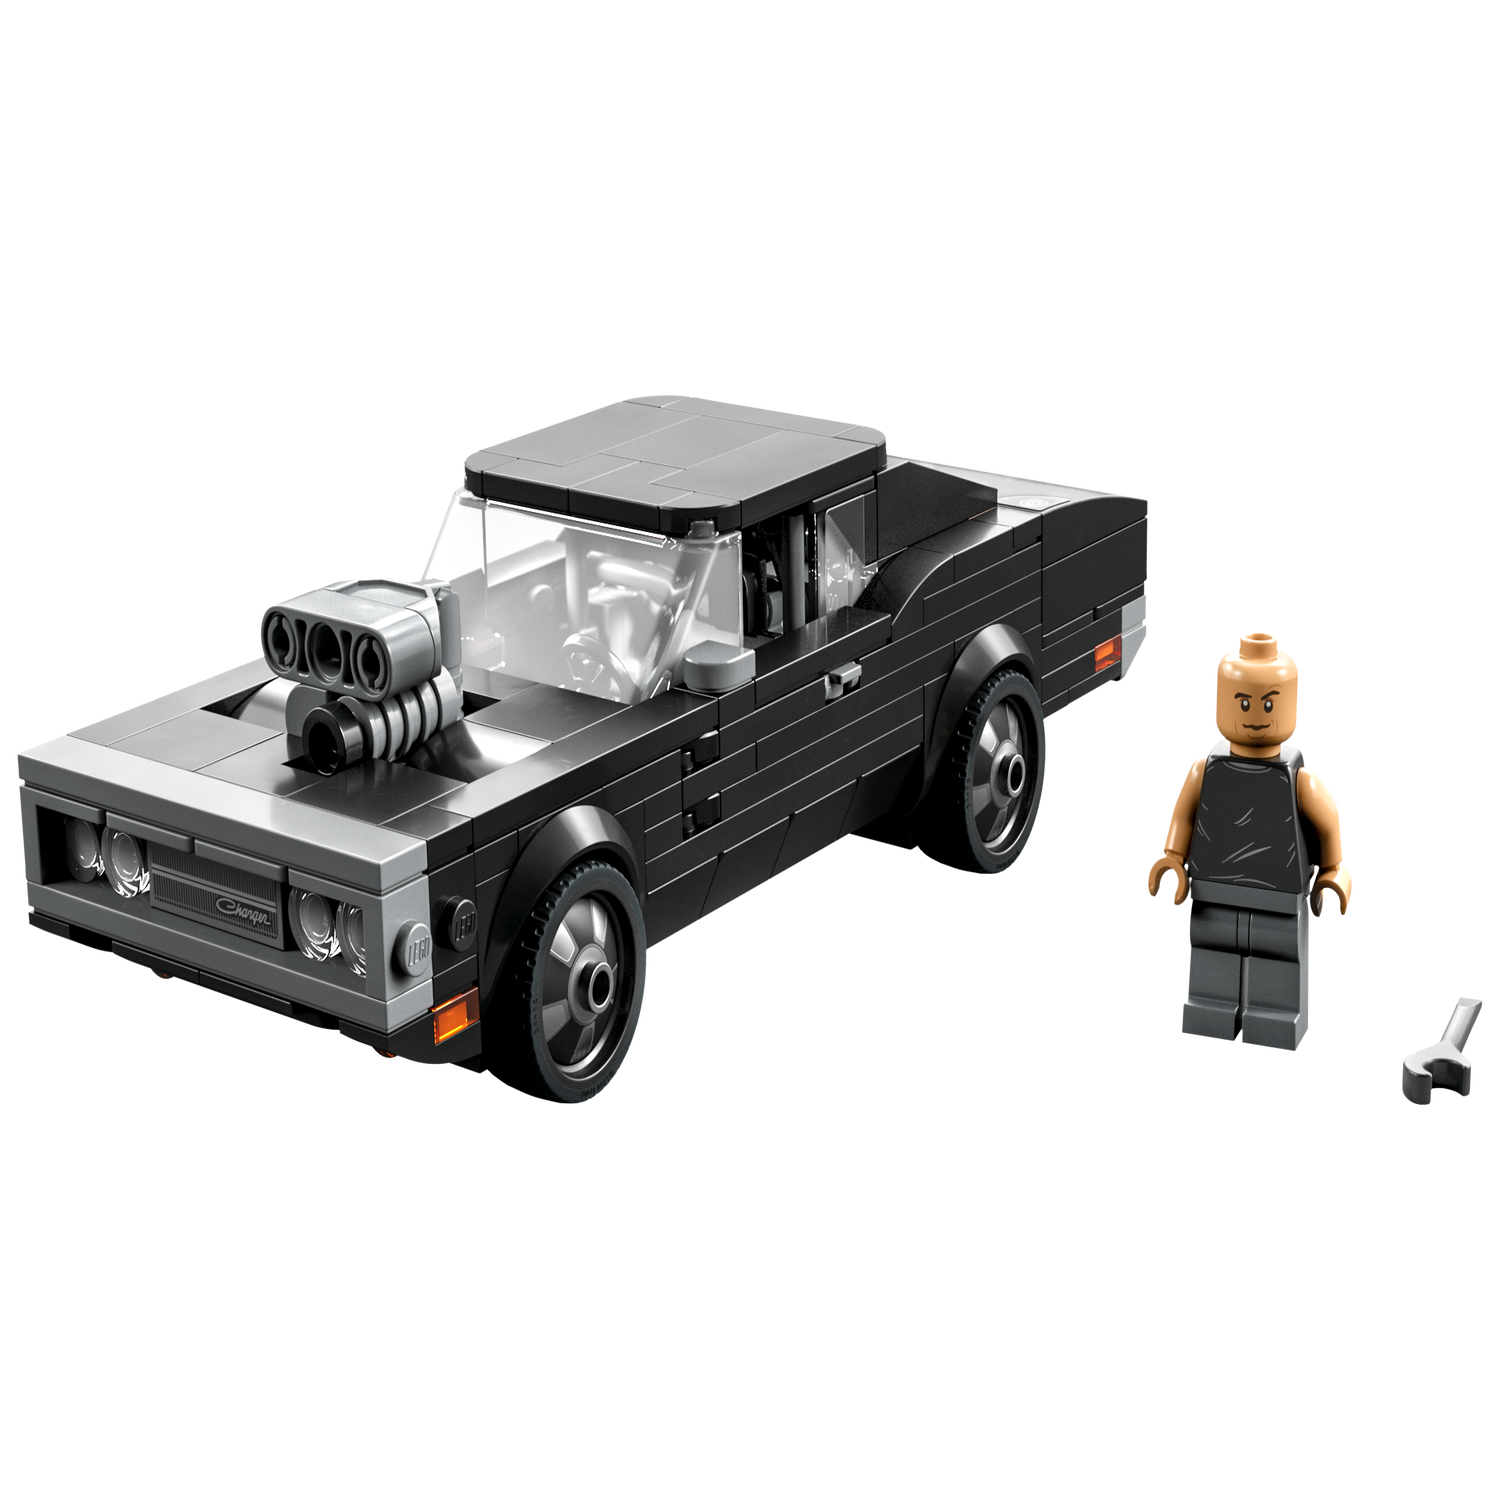 WIN! A Fast & Furious Dodge Charger LEGO Set